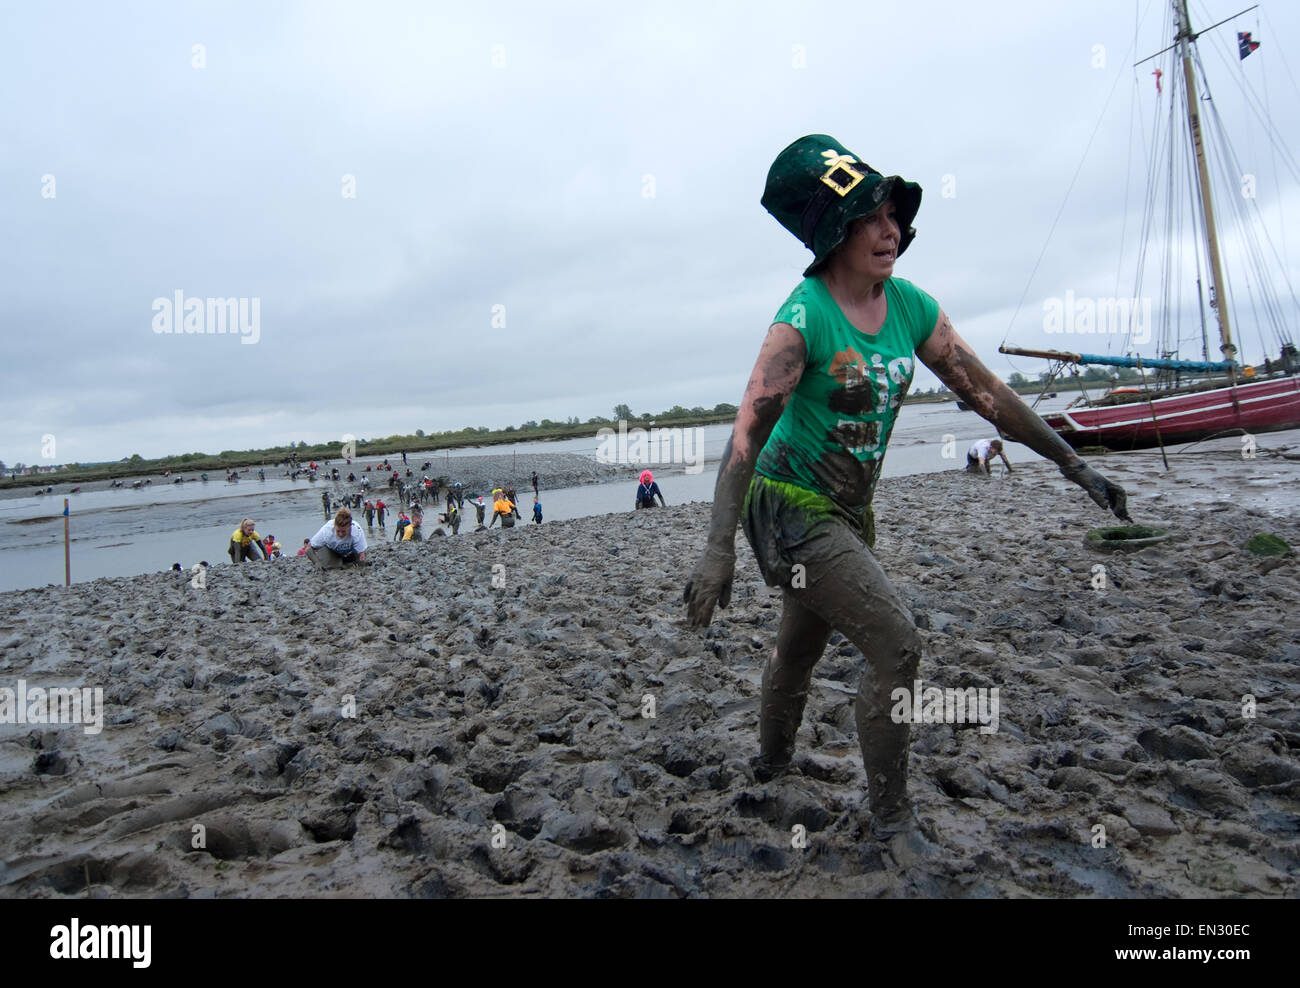 Wearing a Irish top hat a brave lady completes the 2015 maldon mud race. Stock Photo